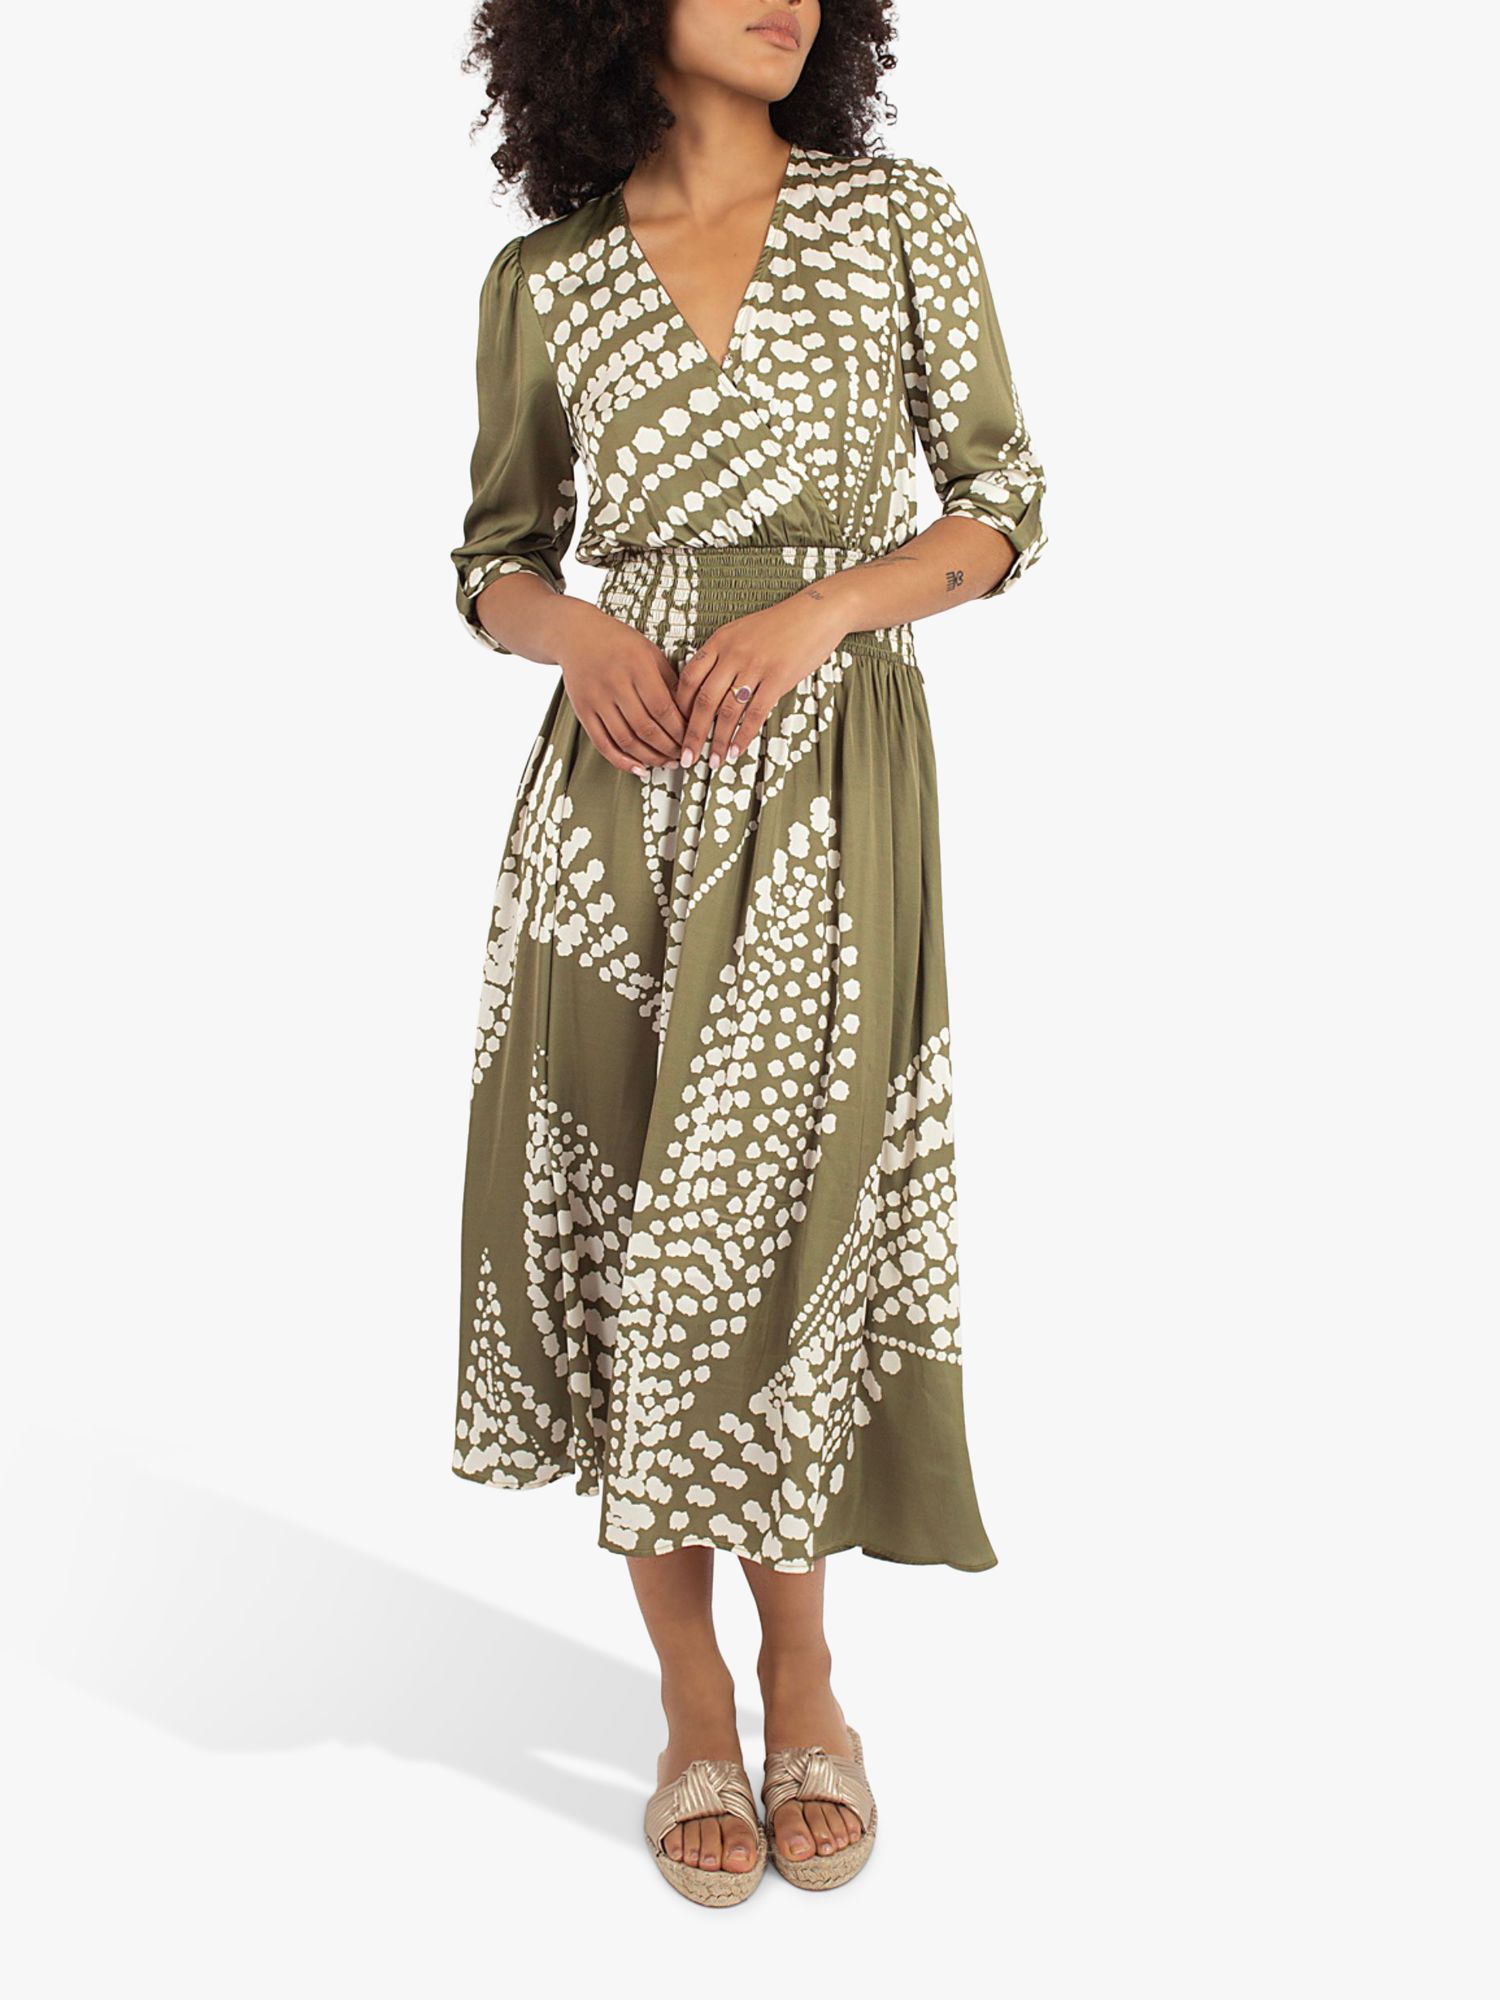 Traffic People The Odes Maia Silk Blend Dress, Olive, M